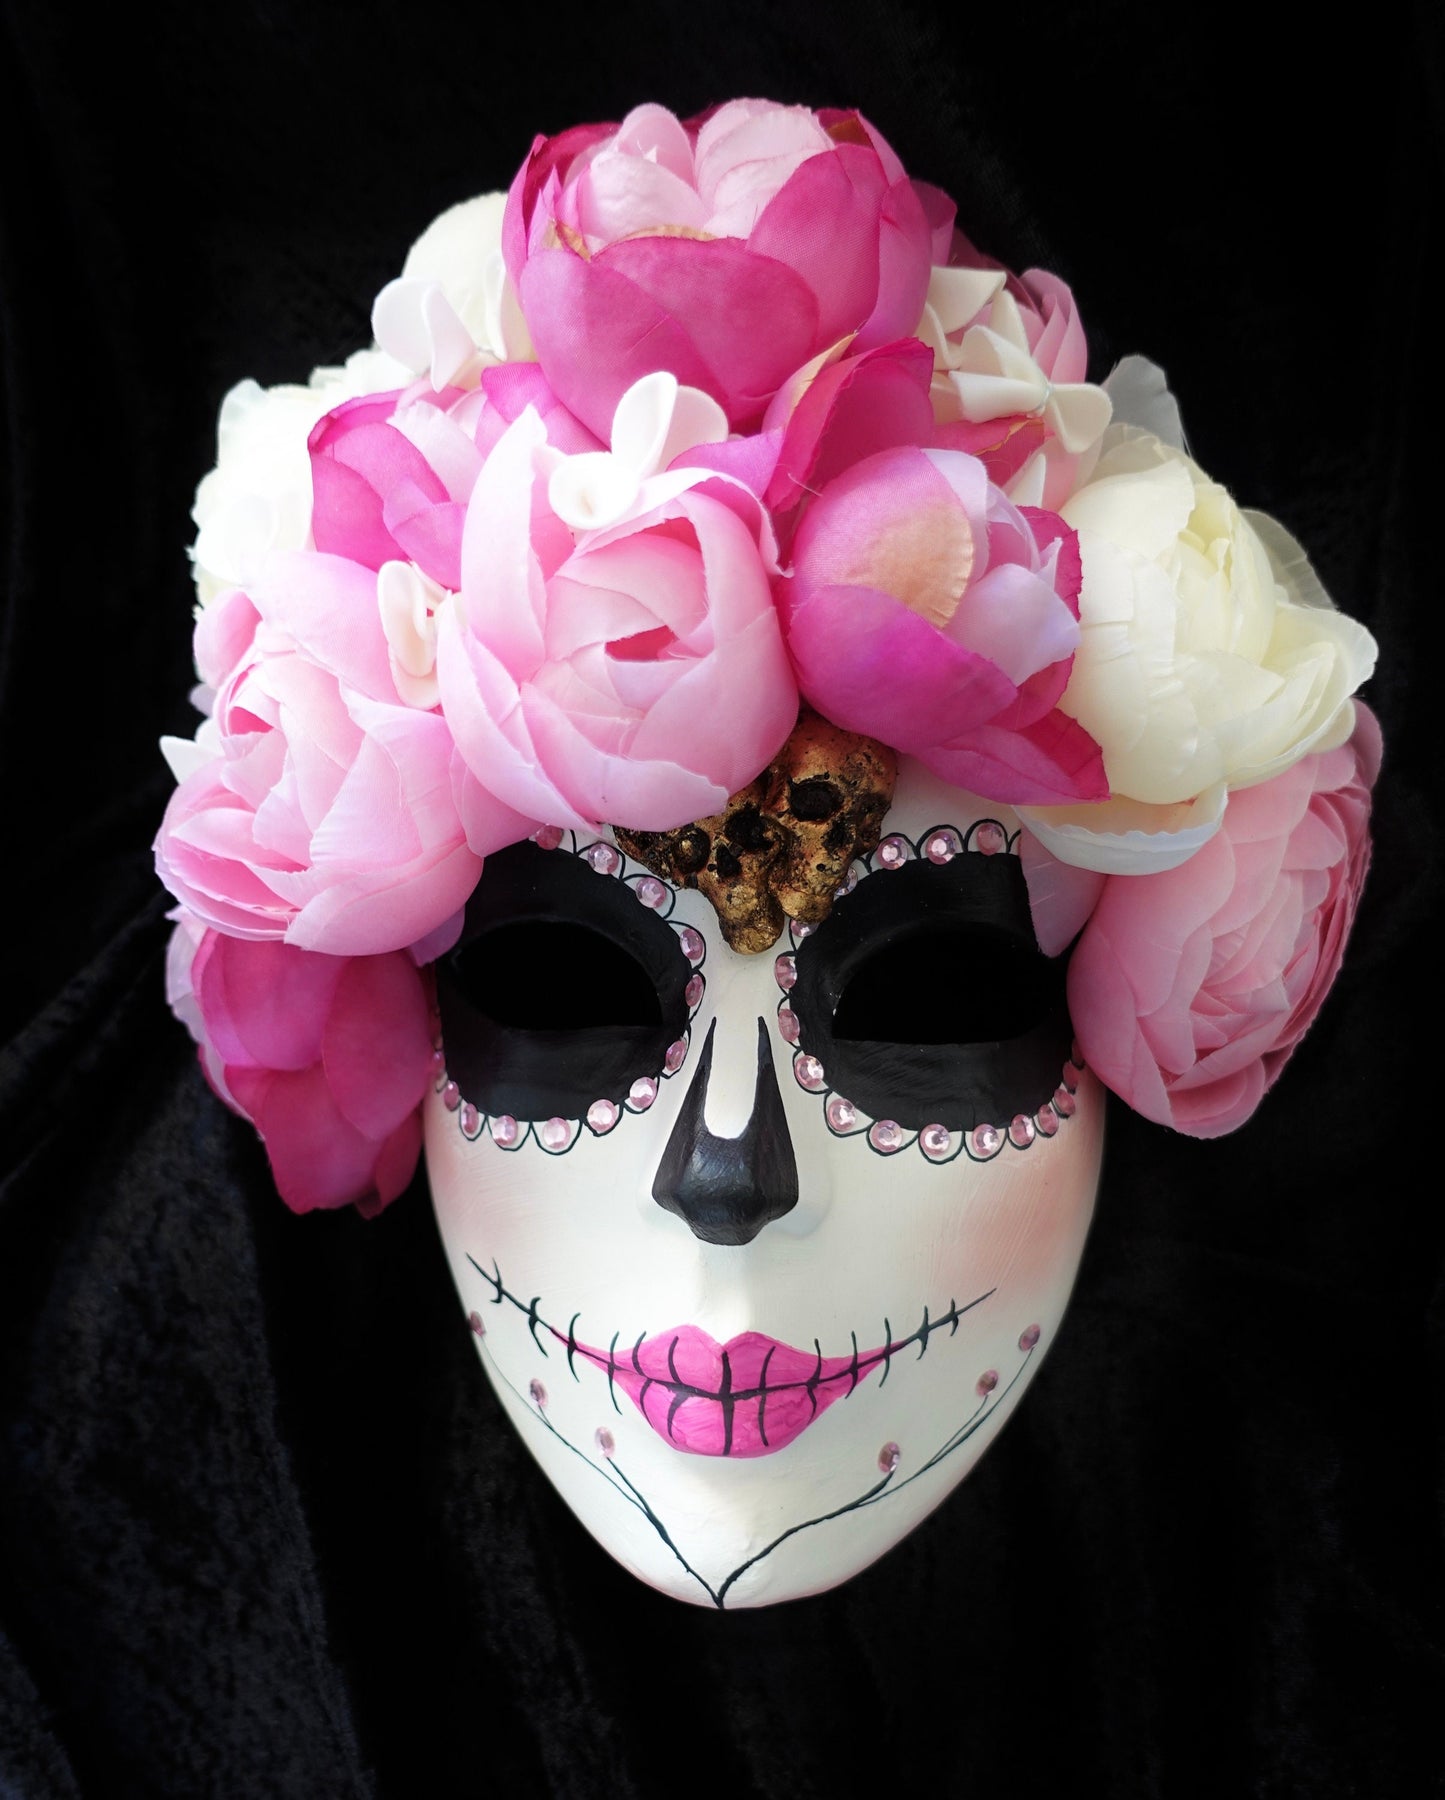 Caterina mask from Mexico day of the death original model Mexican Skull